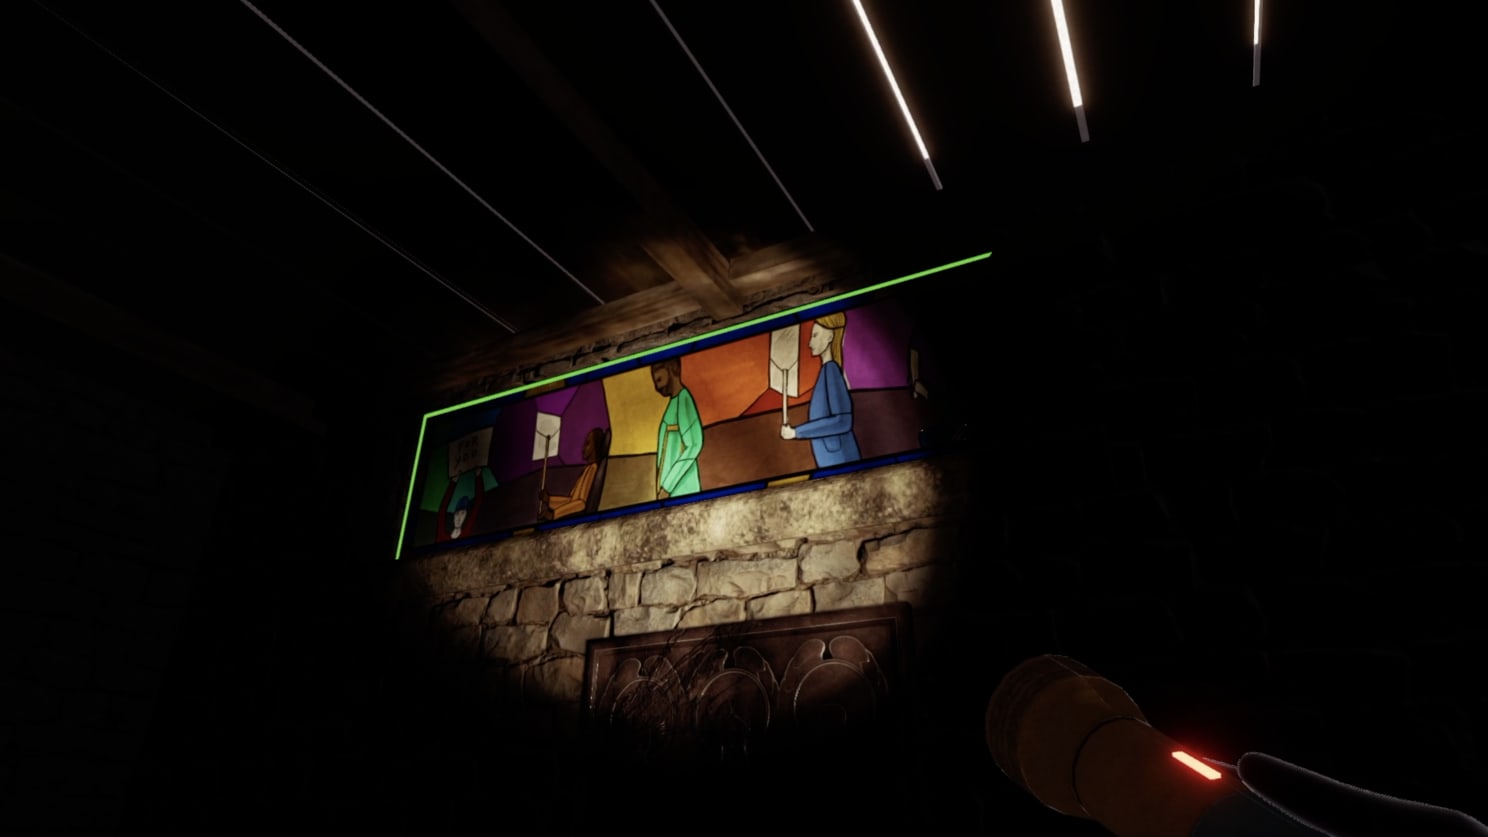  In-game screenshot focusing on a stained glass window. Perspective is limited by the reach of the torchlight, so little beyond the window, the crumbling brick wall it is embedded in, and the wooden floorboards overhead is discernible. The window depicts, in landscape format and bright colours, a diverse line up of figures, some using mobility aids, some holding placards above their heads.